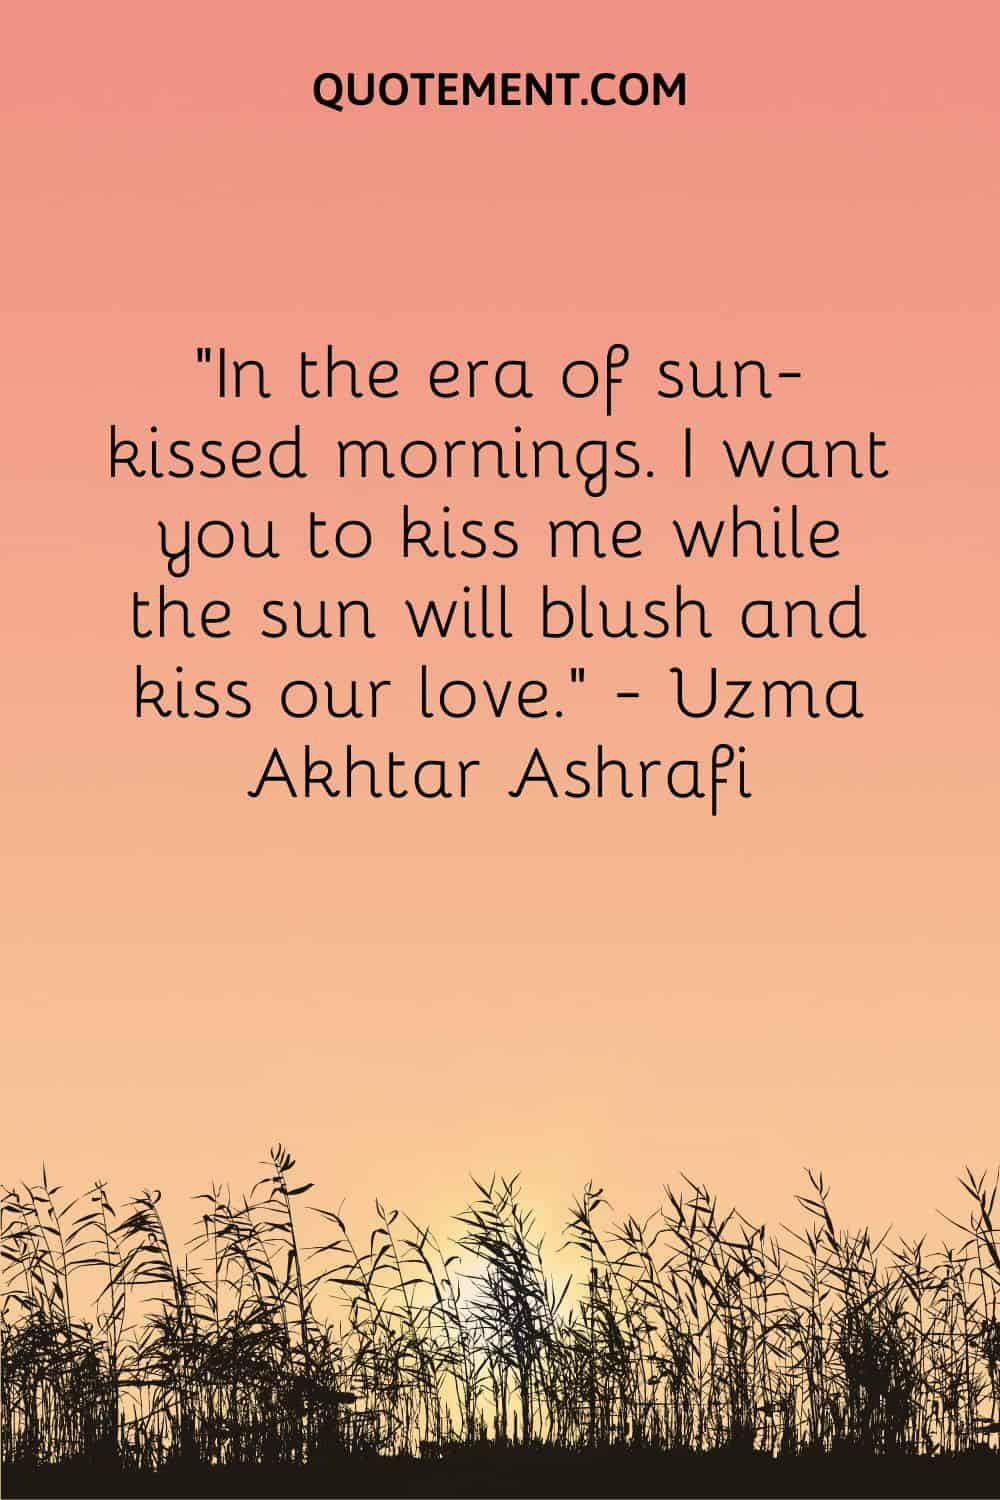 In the era of sun-kissed mornings. I want you to kiss me while the sun will blush and kiss our love